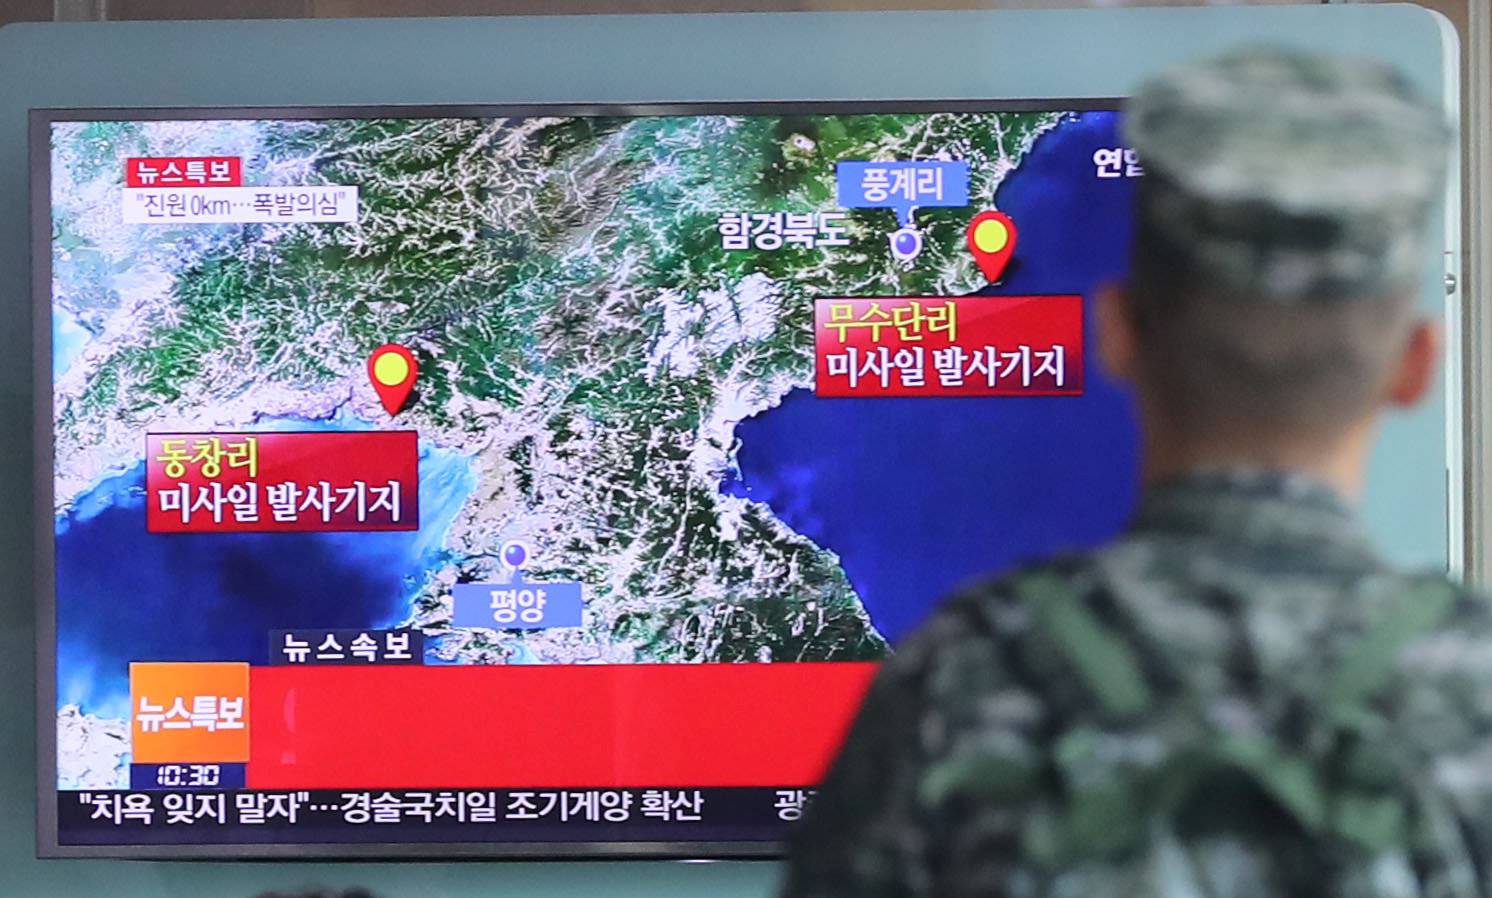 A South Korean soldier watches a TV broadcasting a news report on Seismic activity produced by a suspected North Korean nuclear test, at a railway station in Seoul